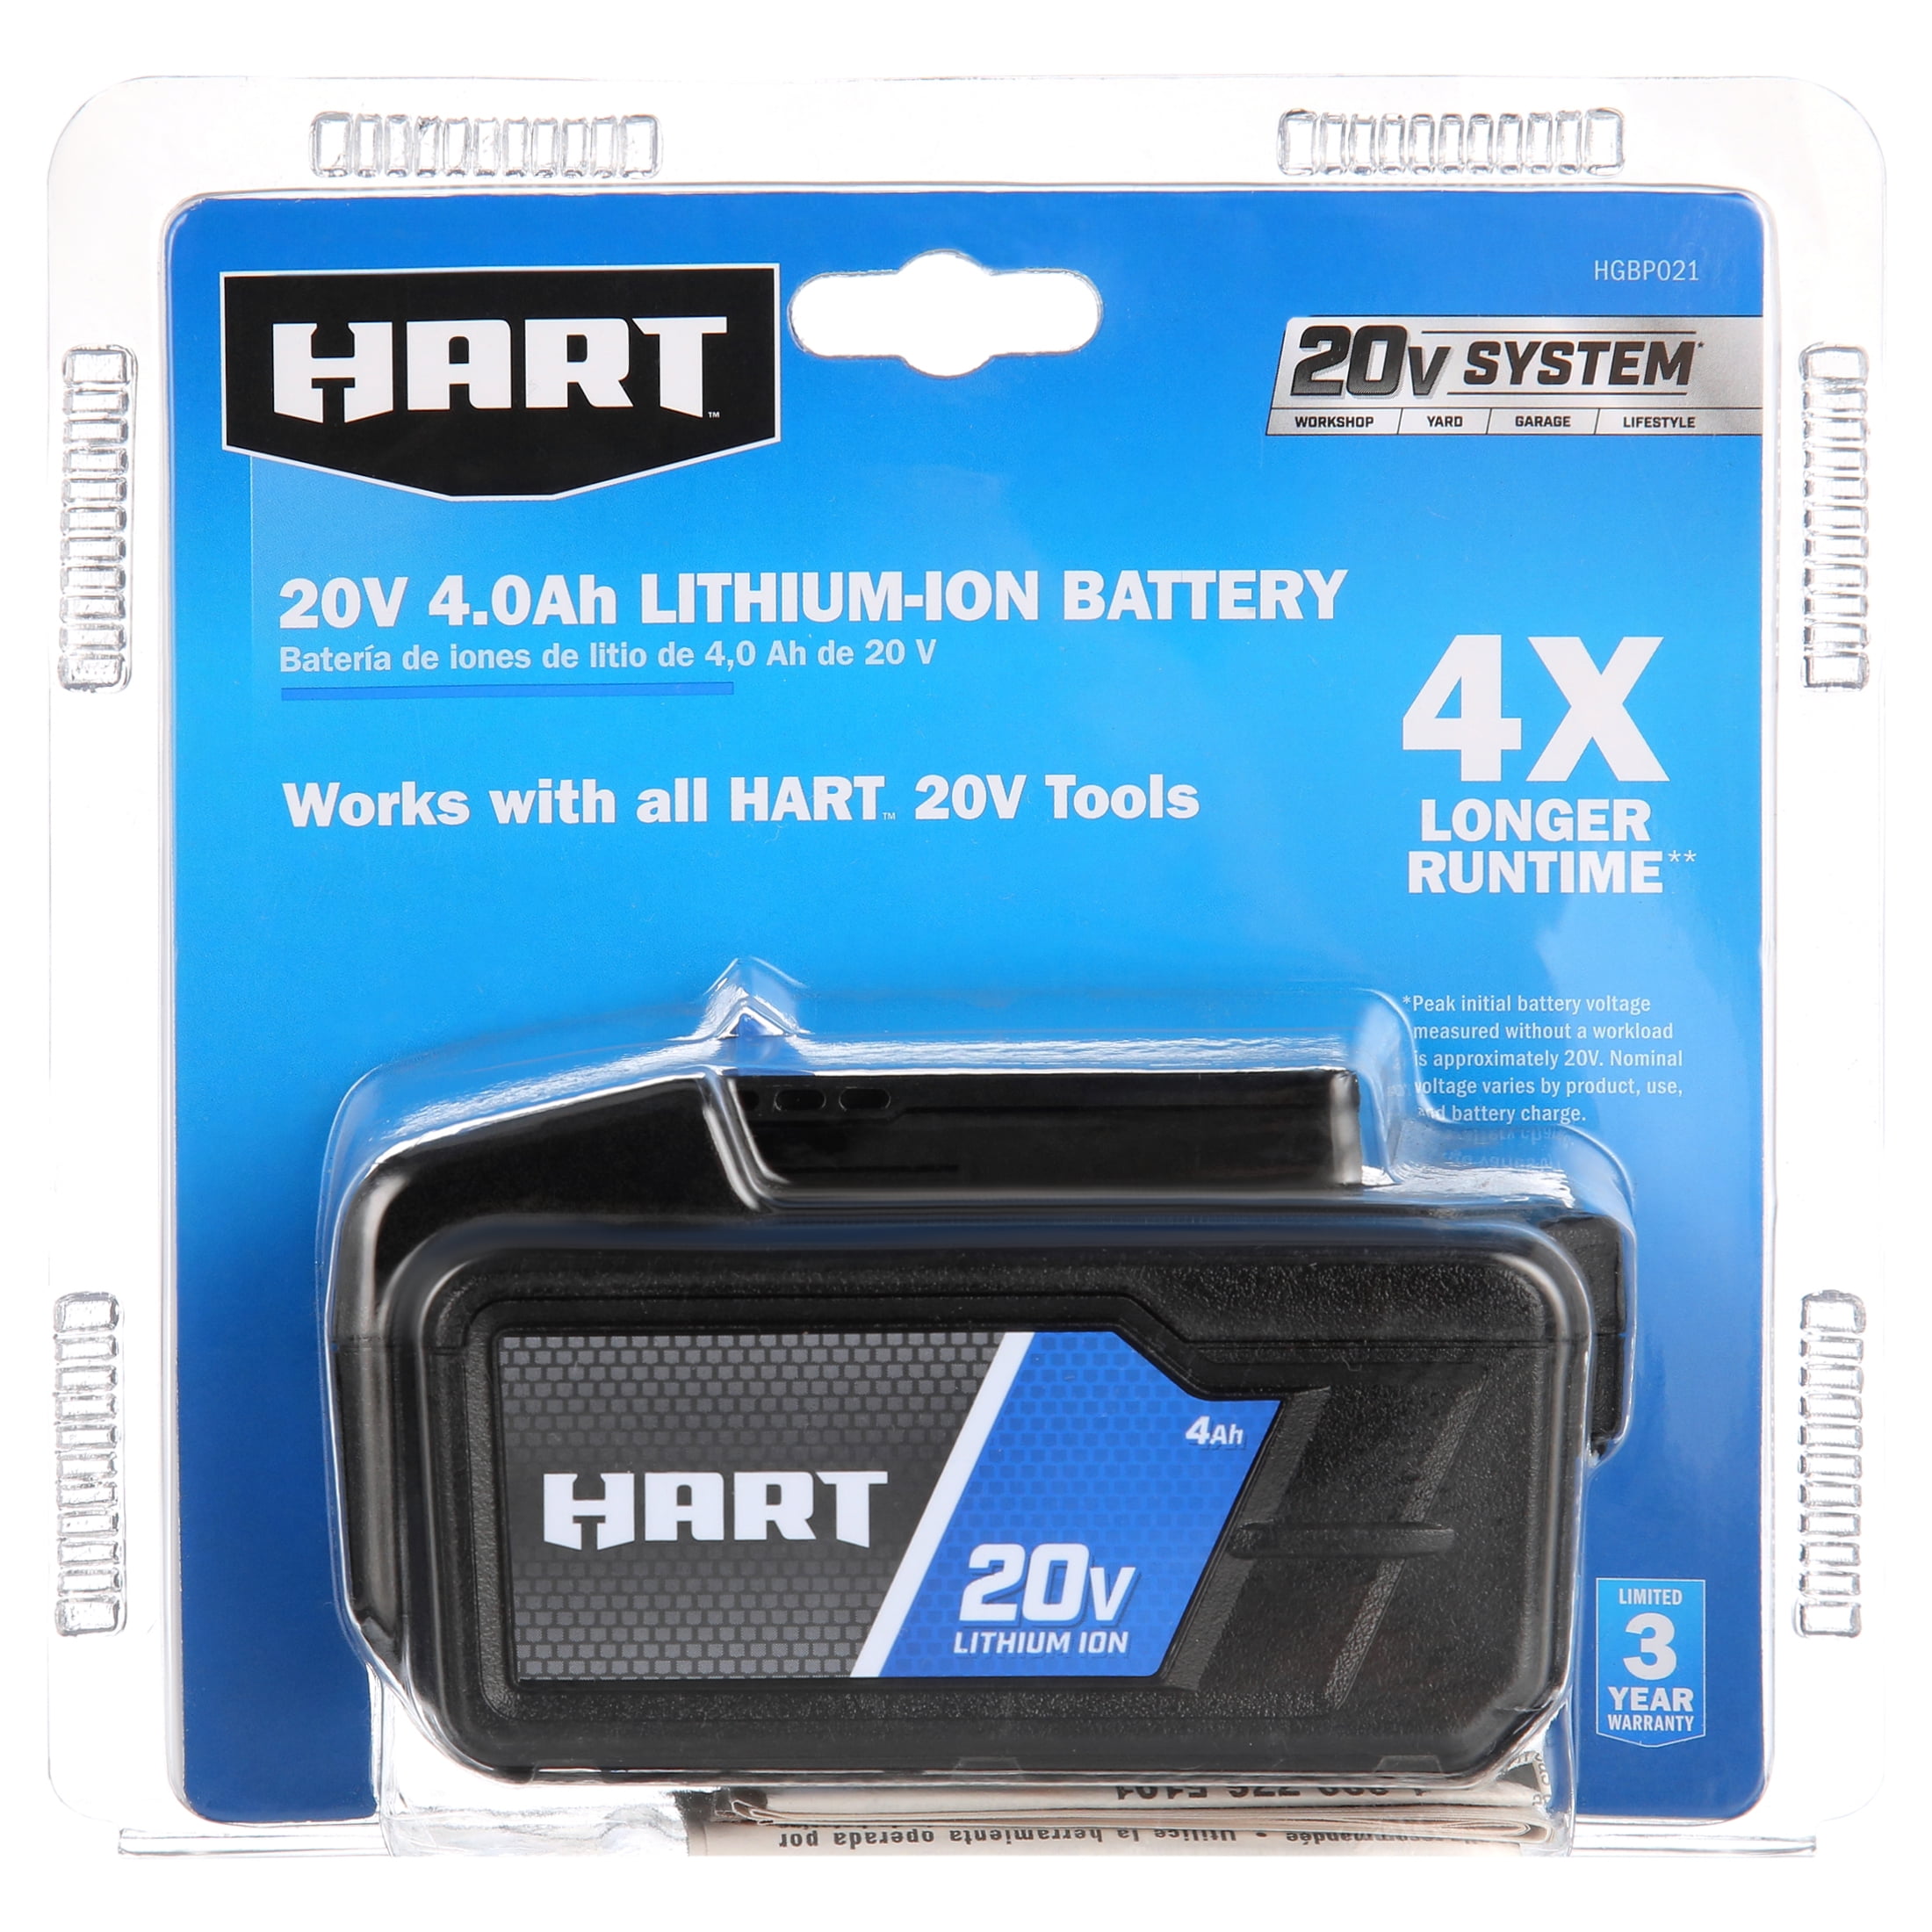 HART 20V Lithium-Ion 4.0Ah Battery (Charger Not Included)